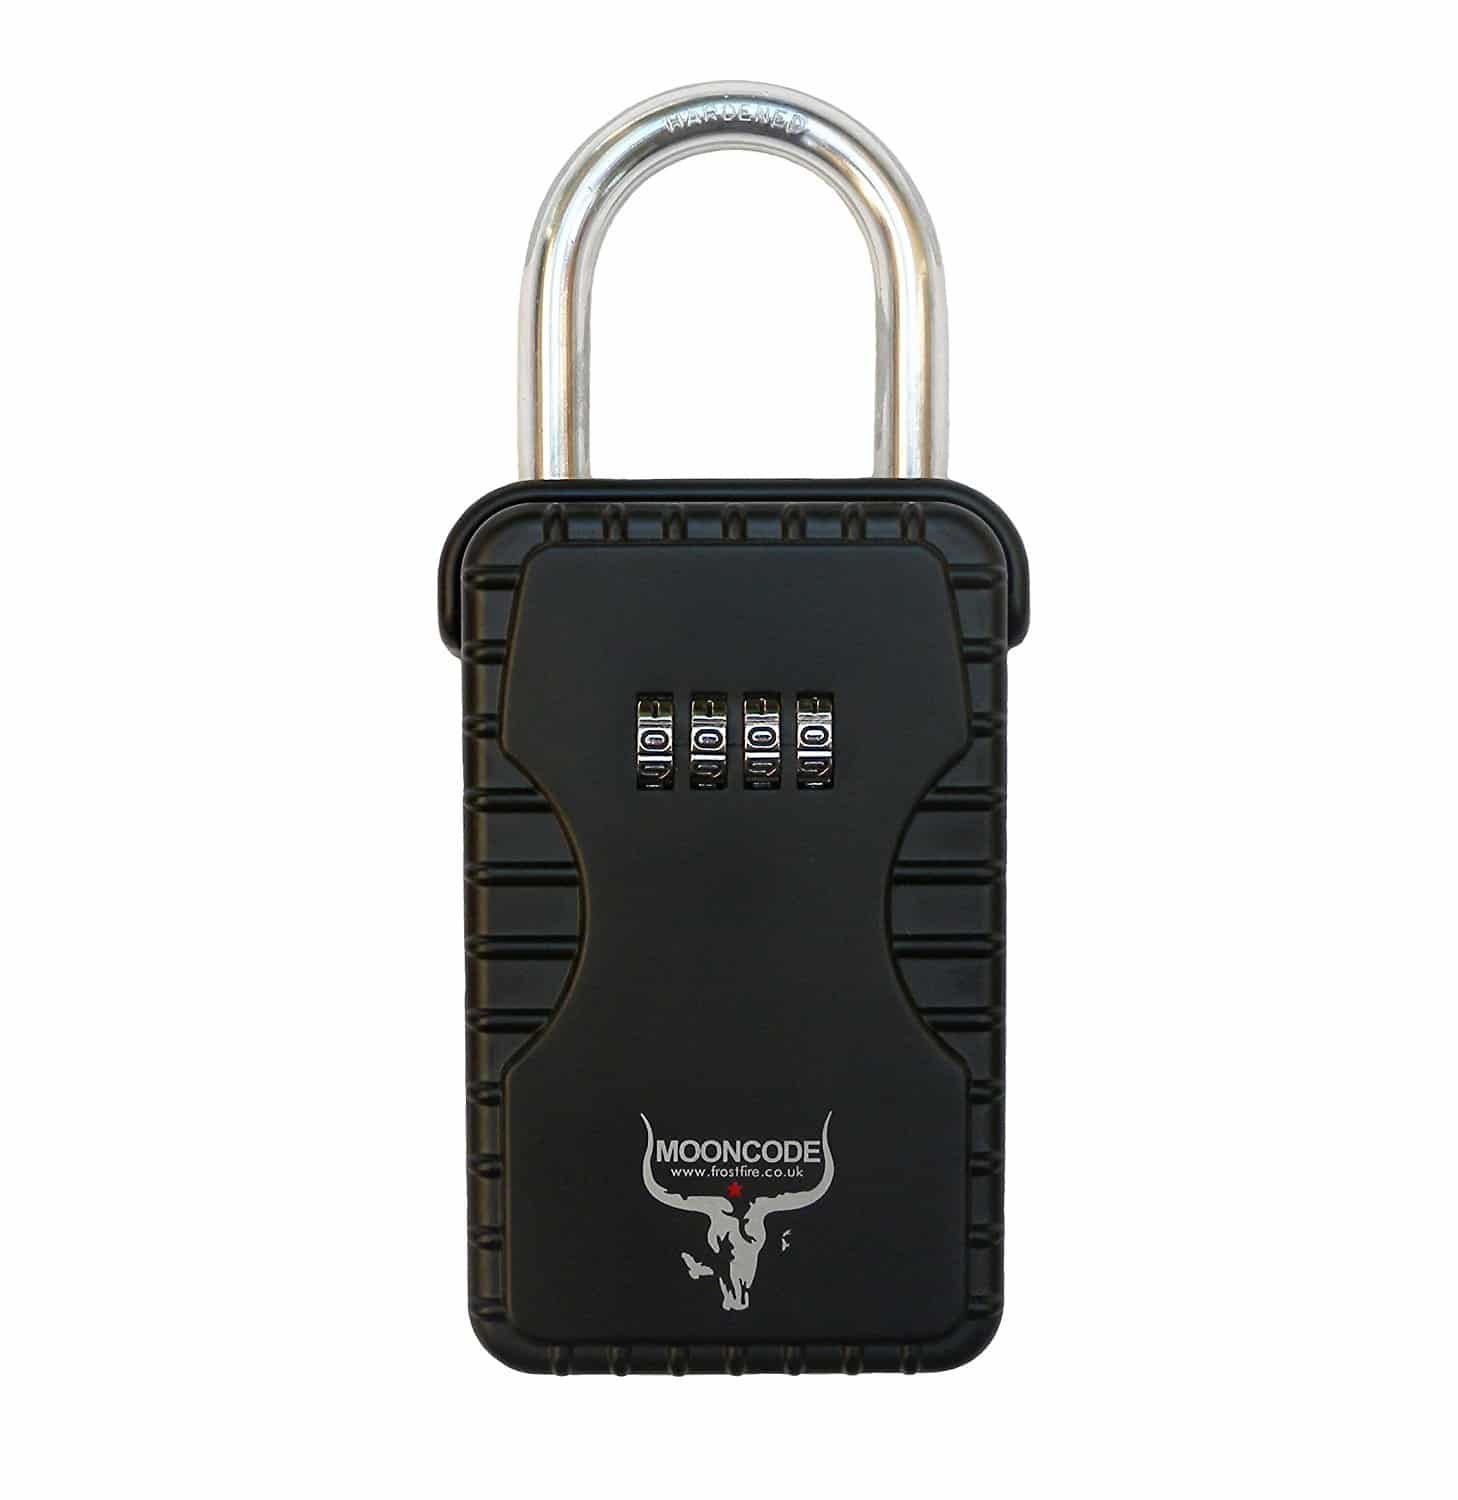 Review of Frostfire Mooncode Key Security Lock